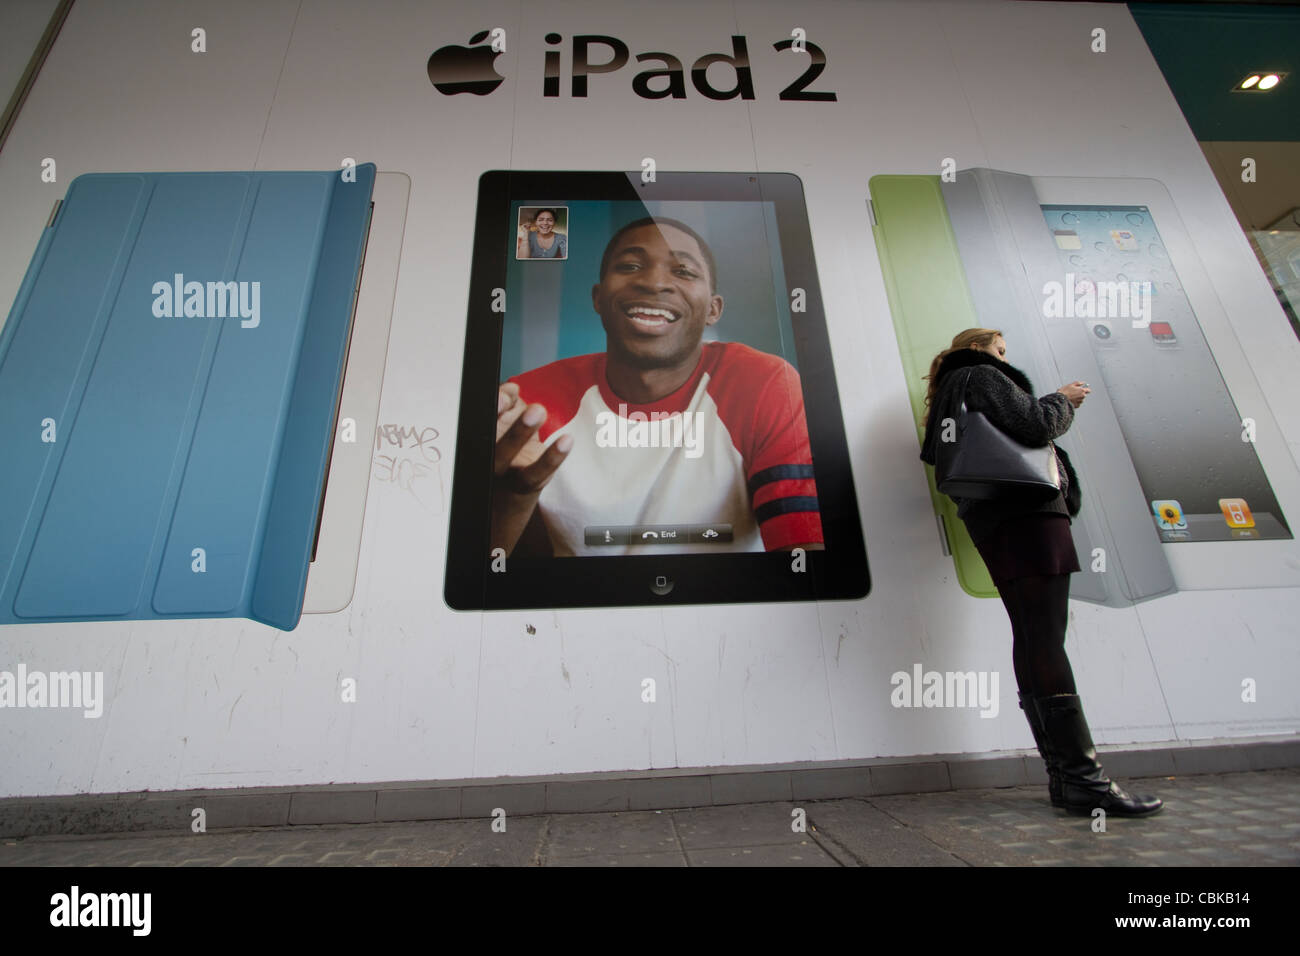 ipad 2, Advertisement, billboard for IPad2 Central London, with shopper using phone in foreground Stock Photo